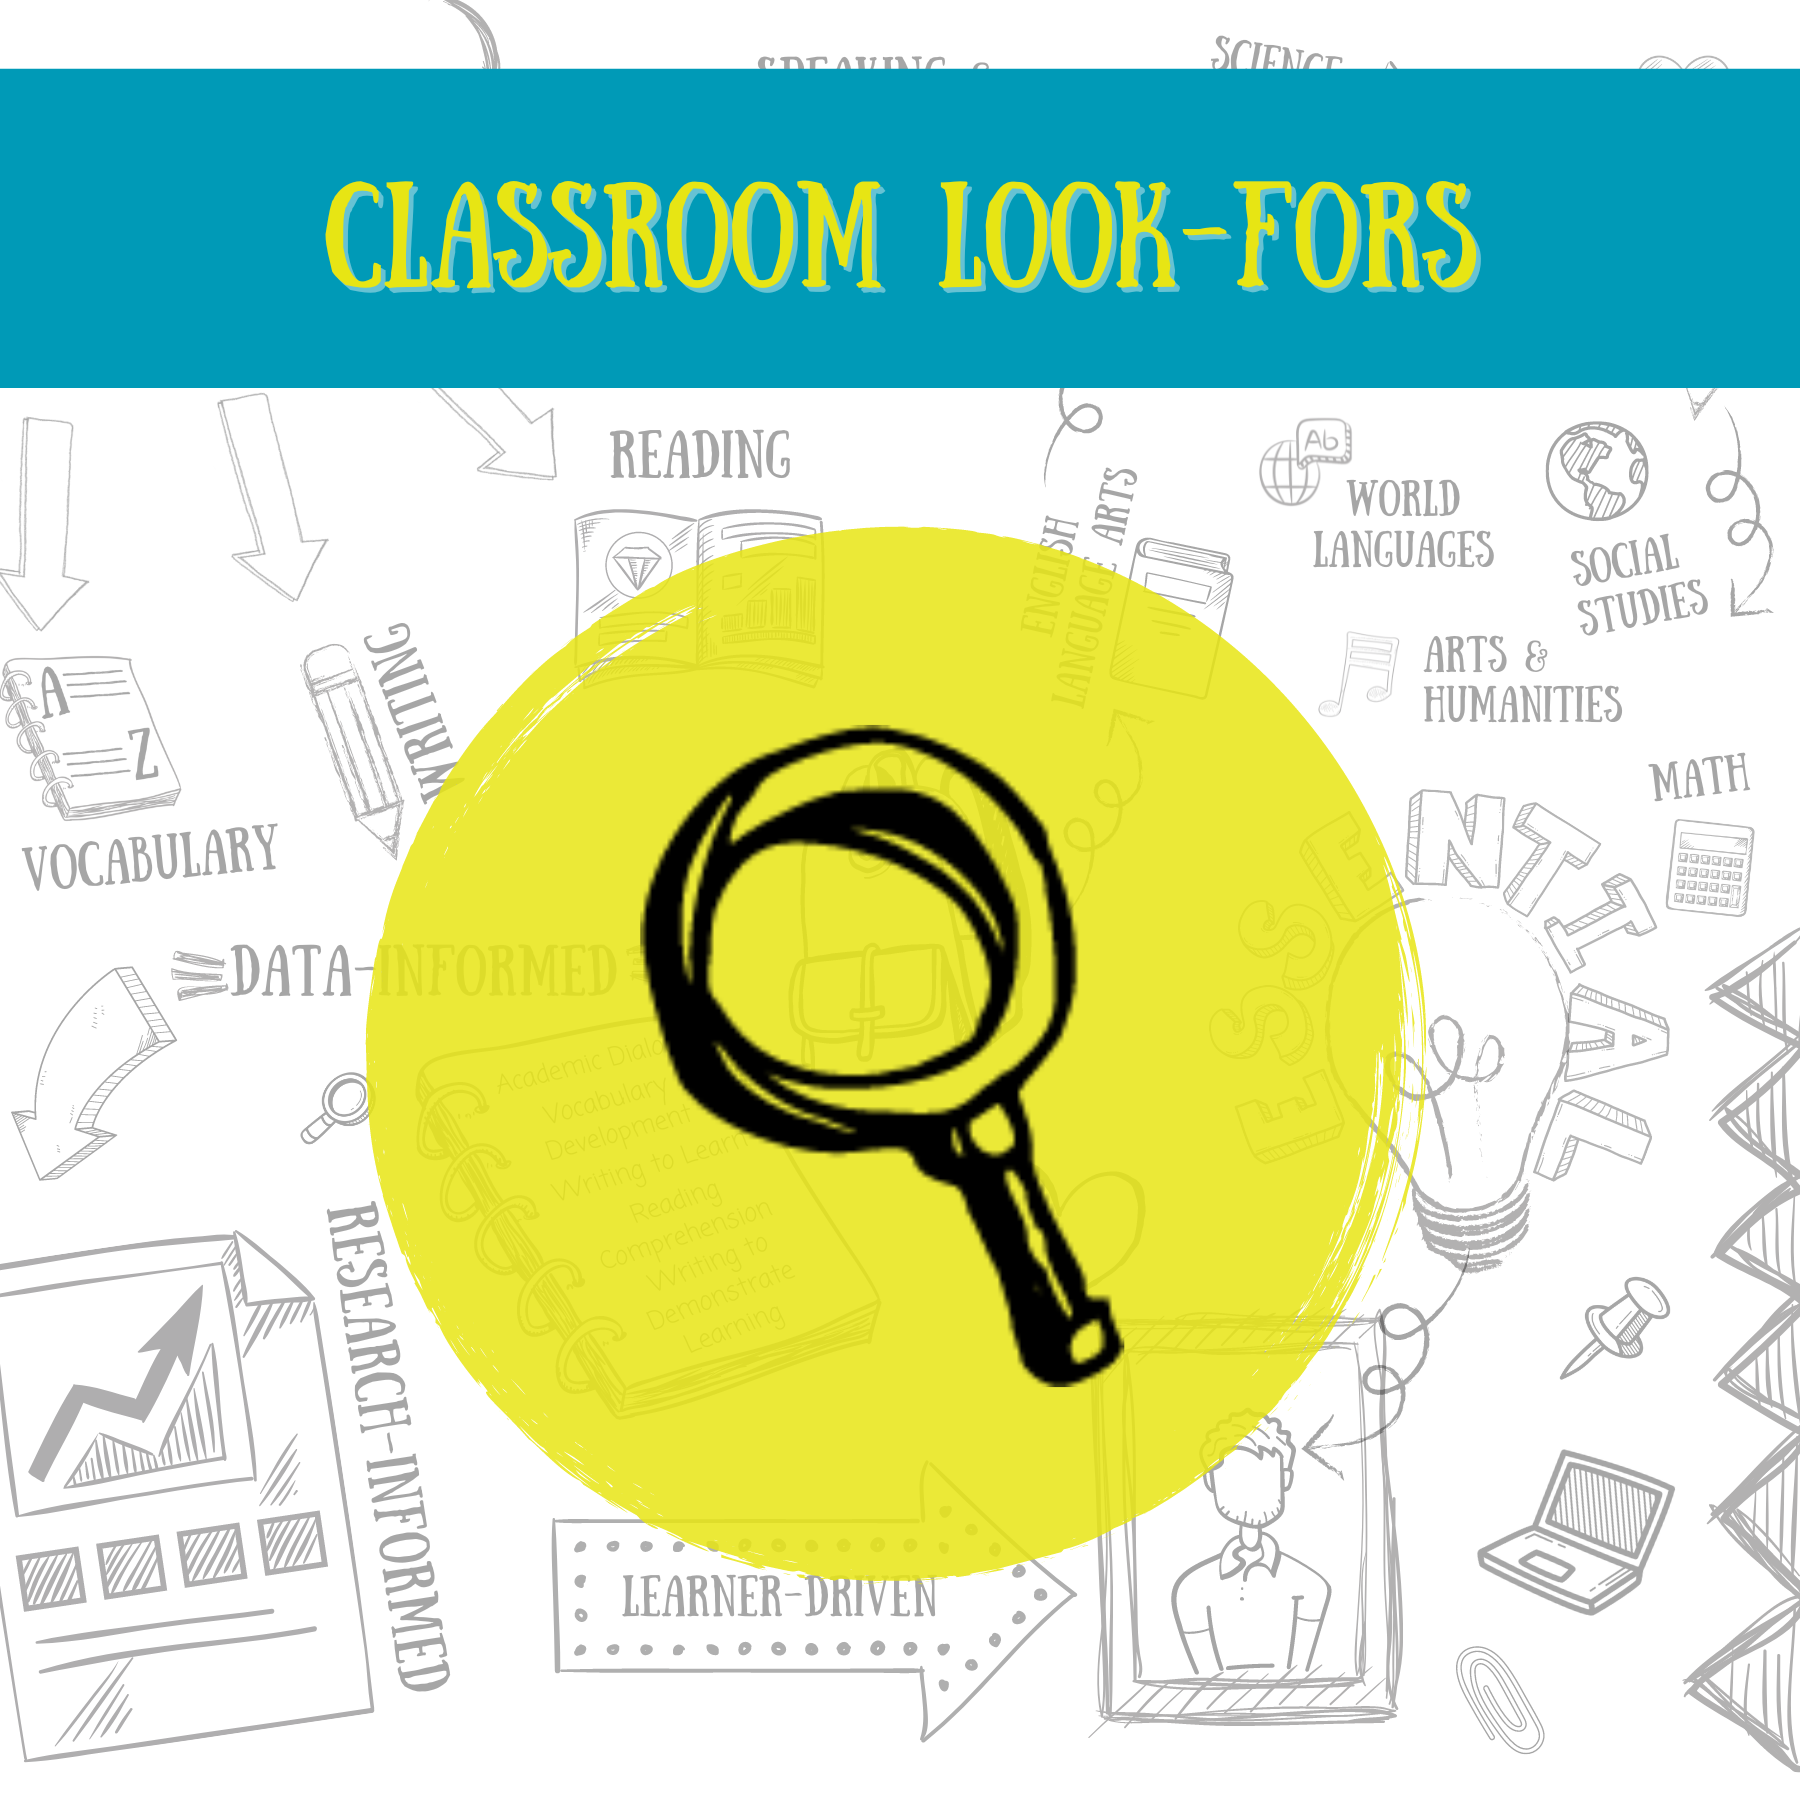 ALM Classroom Look-fors